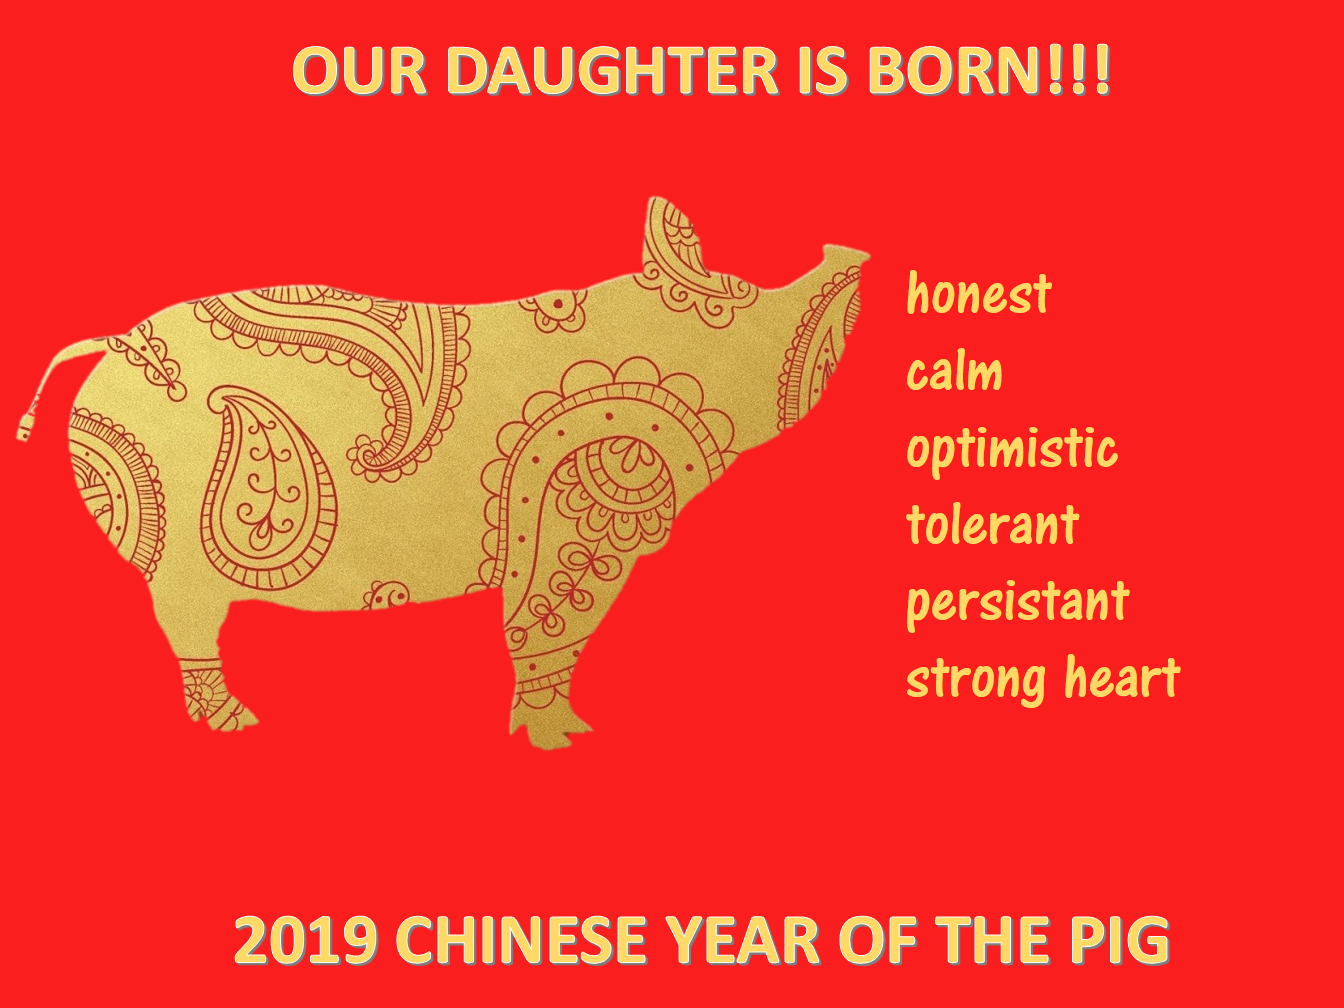 Chinese New Year Daughter is Born 2019 Year Pig main image